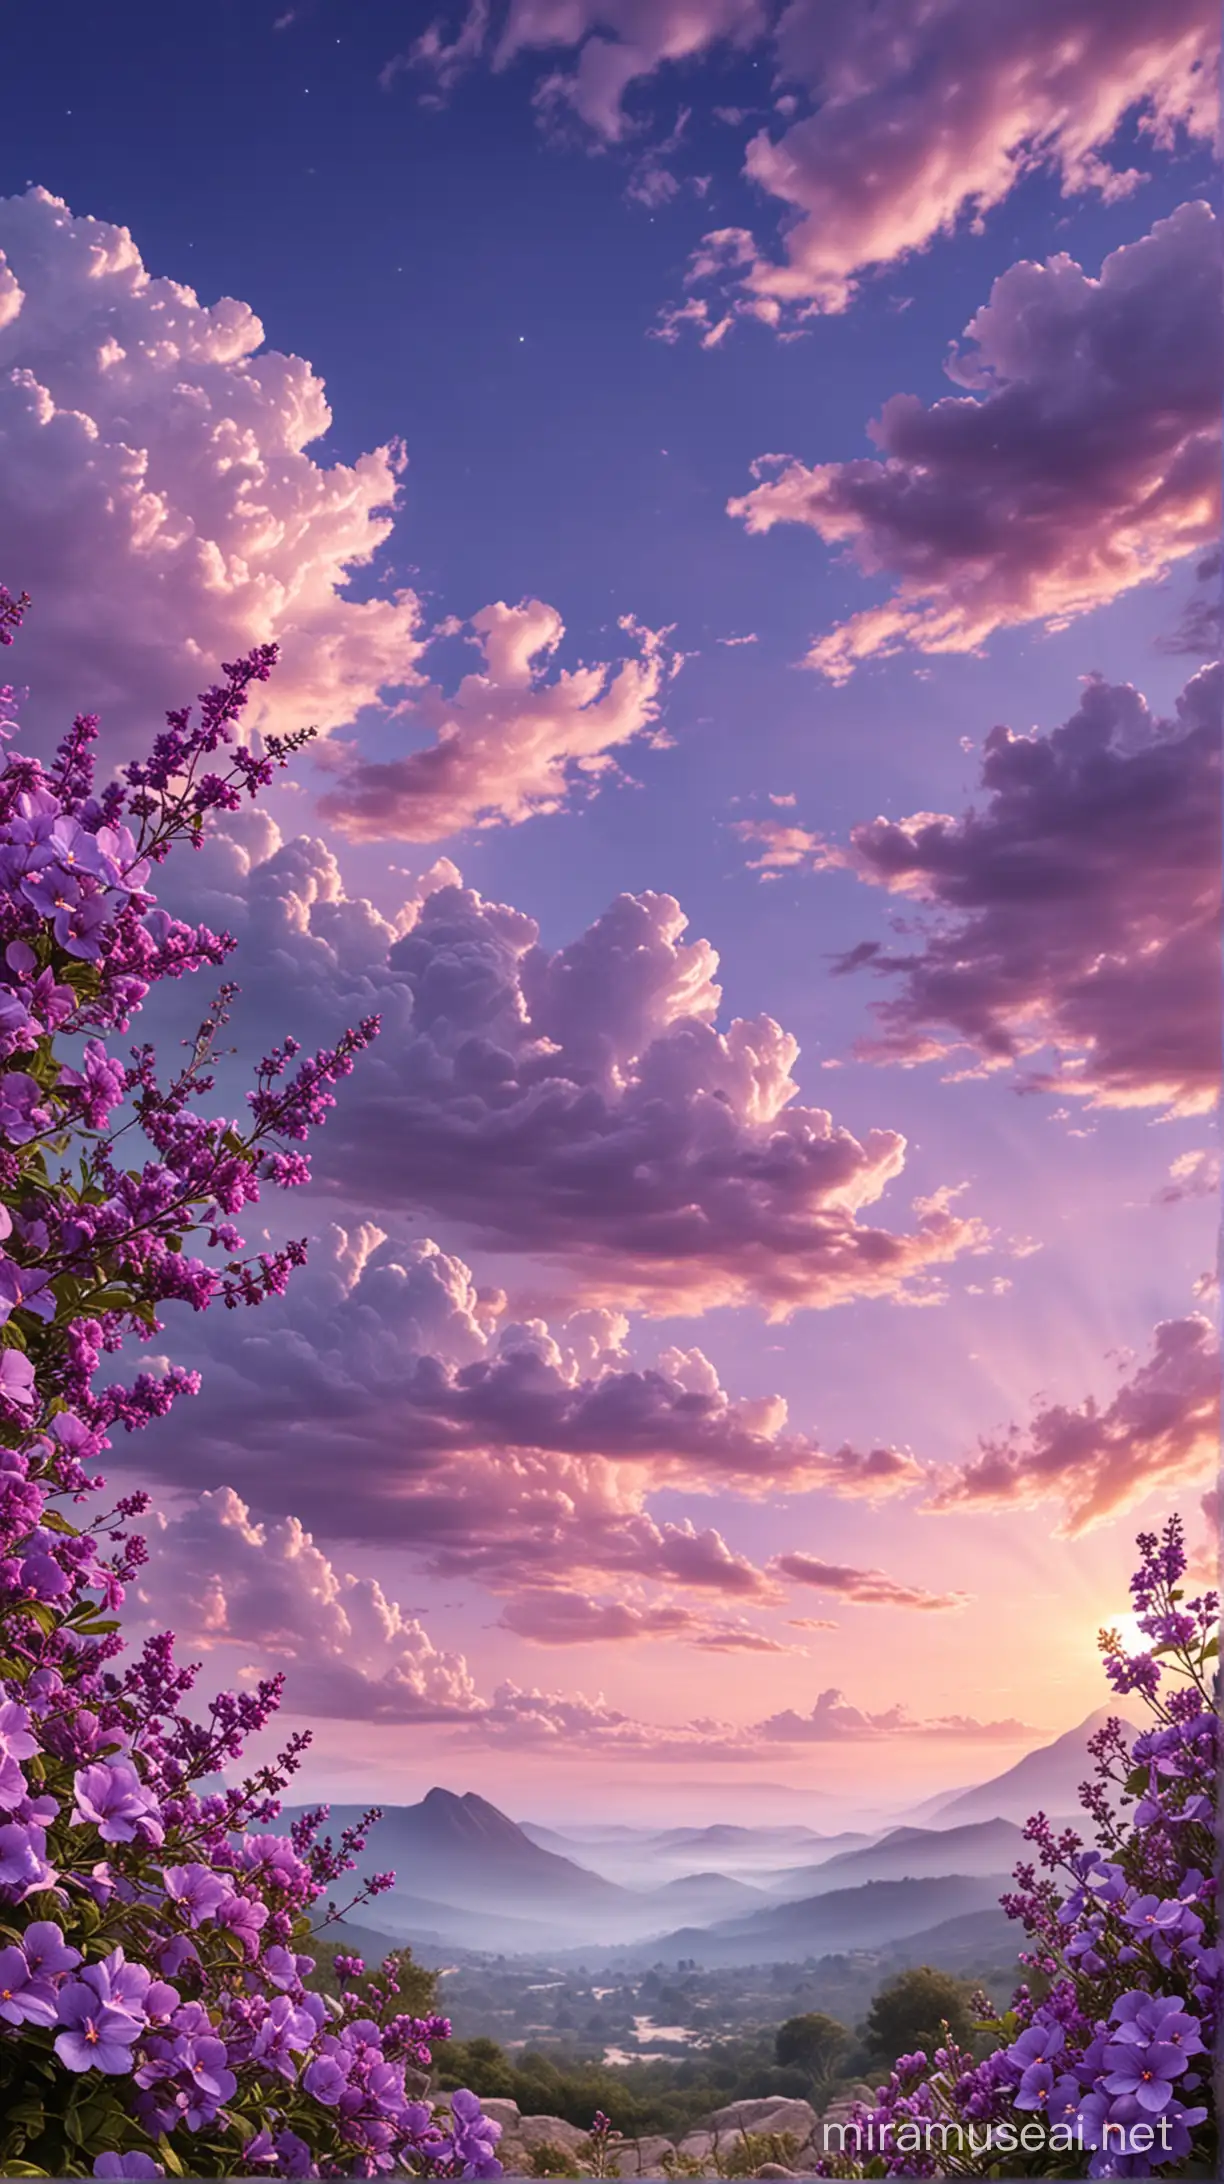 beautiful memorial sky background with purple
 flowers